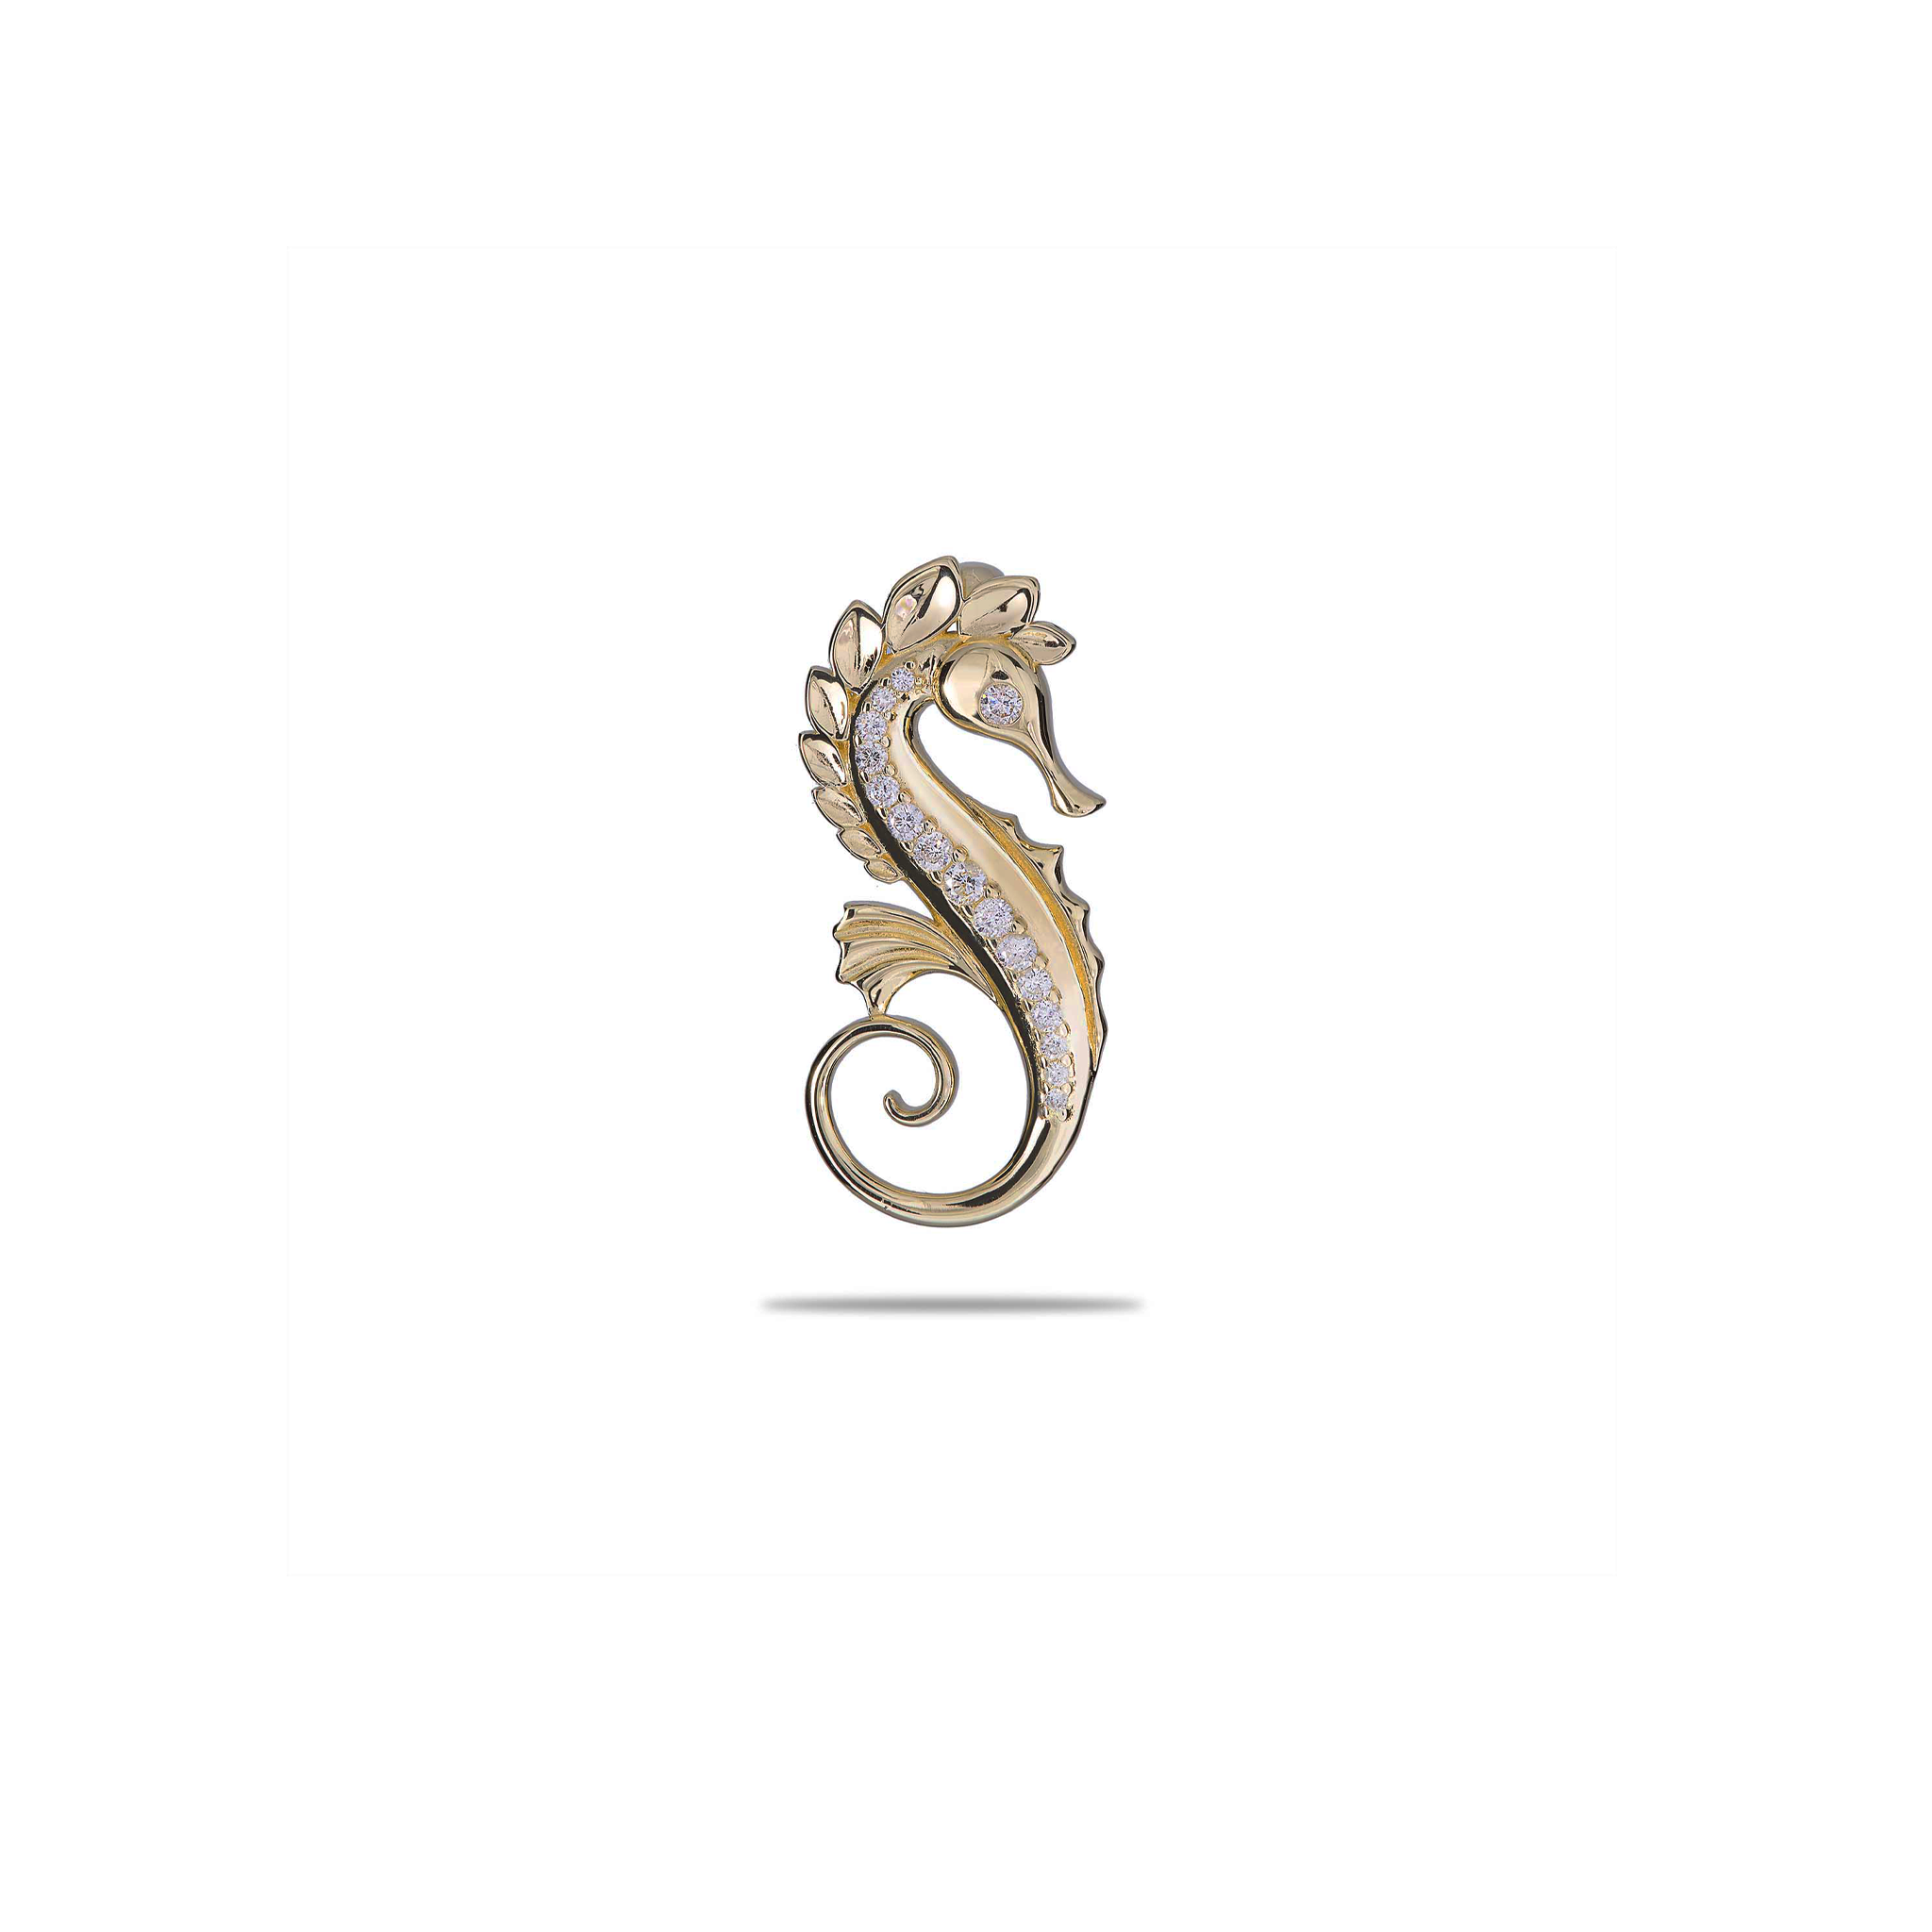 Ocean Dance Seahorse Pendant in Gold with Diamonds - 24mm